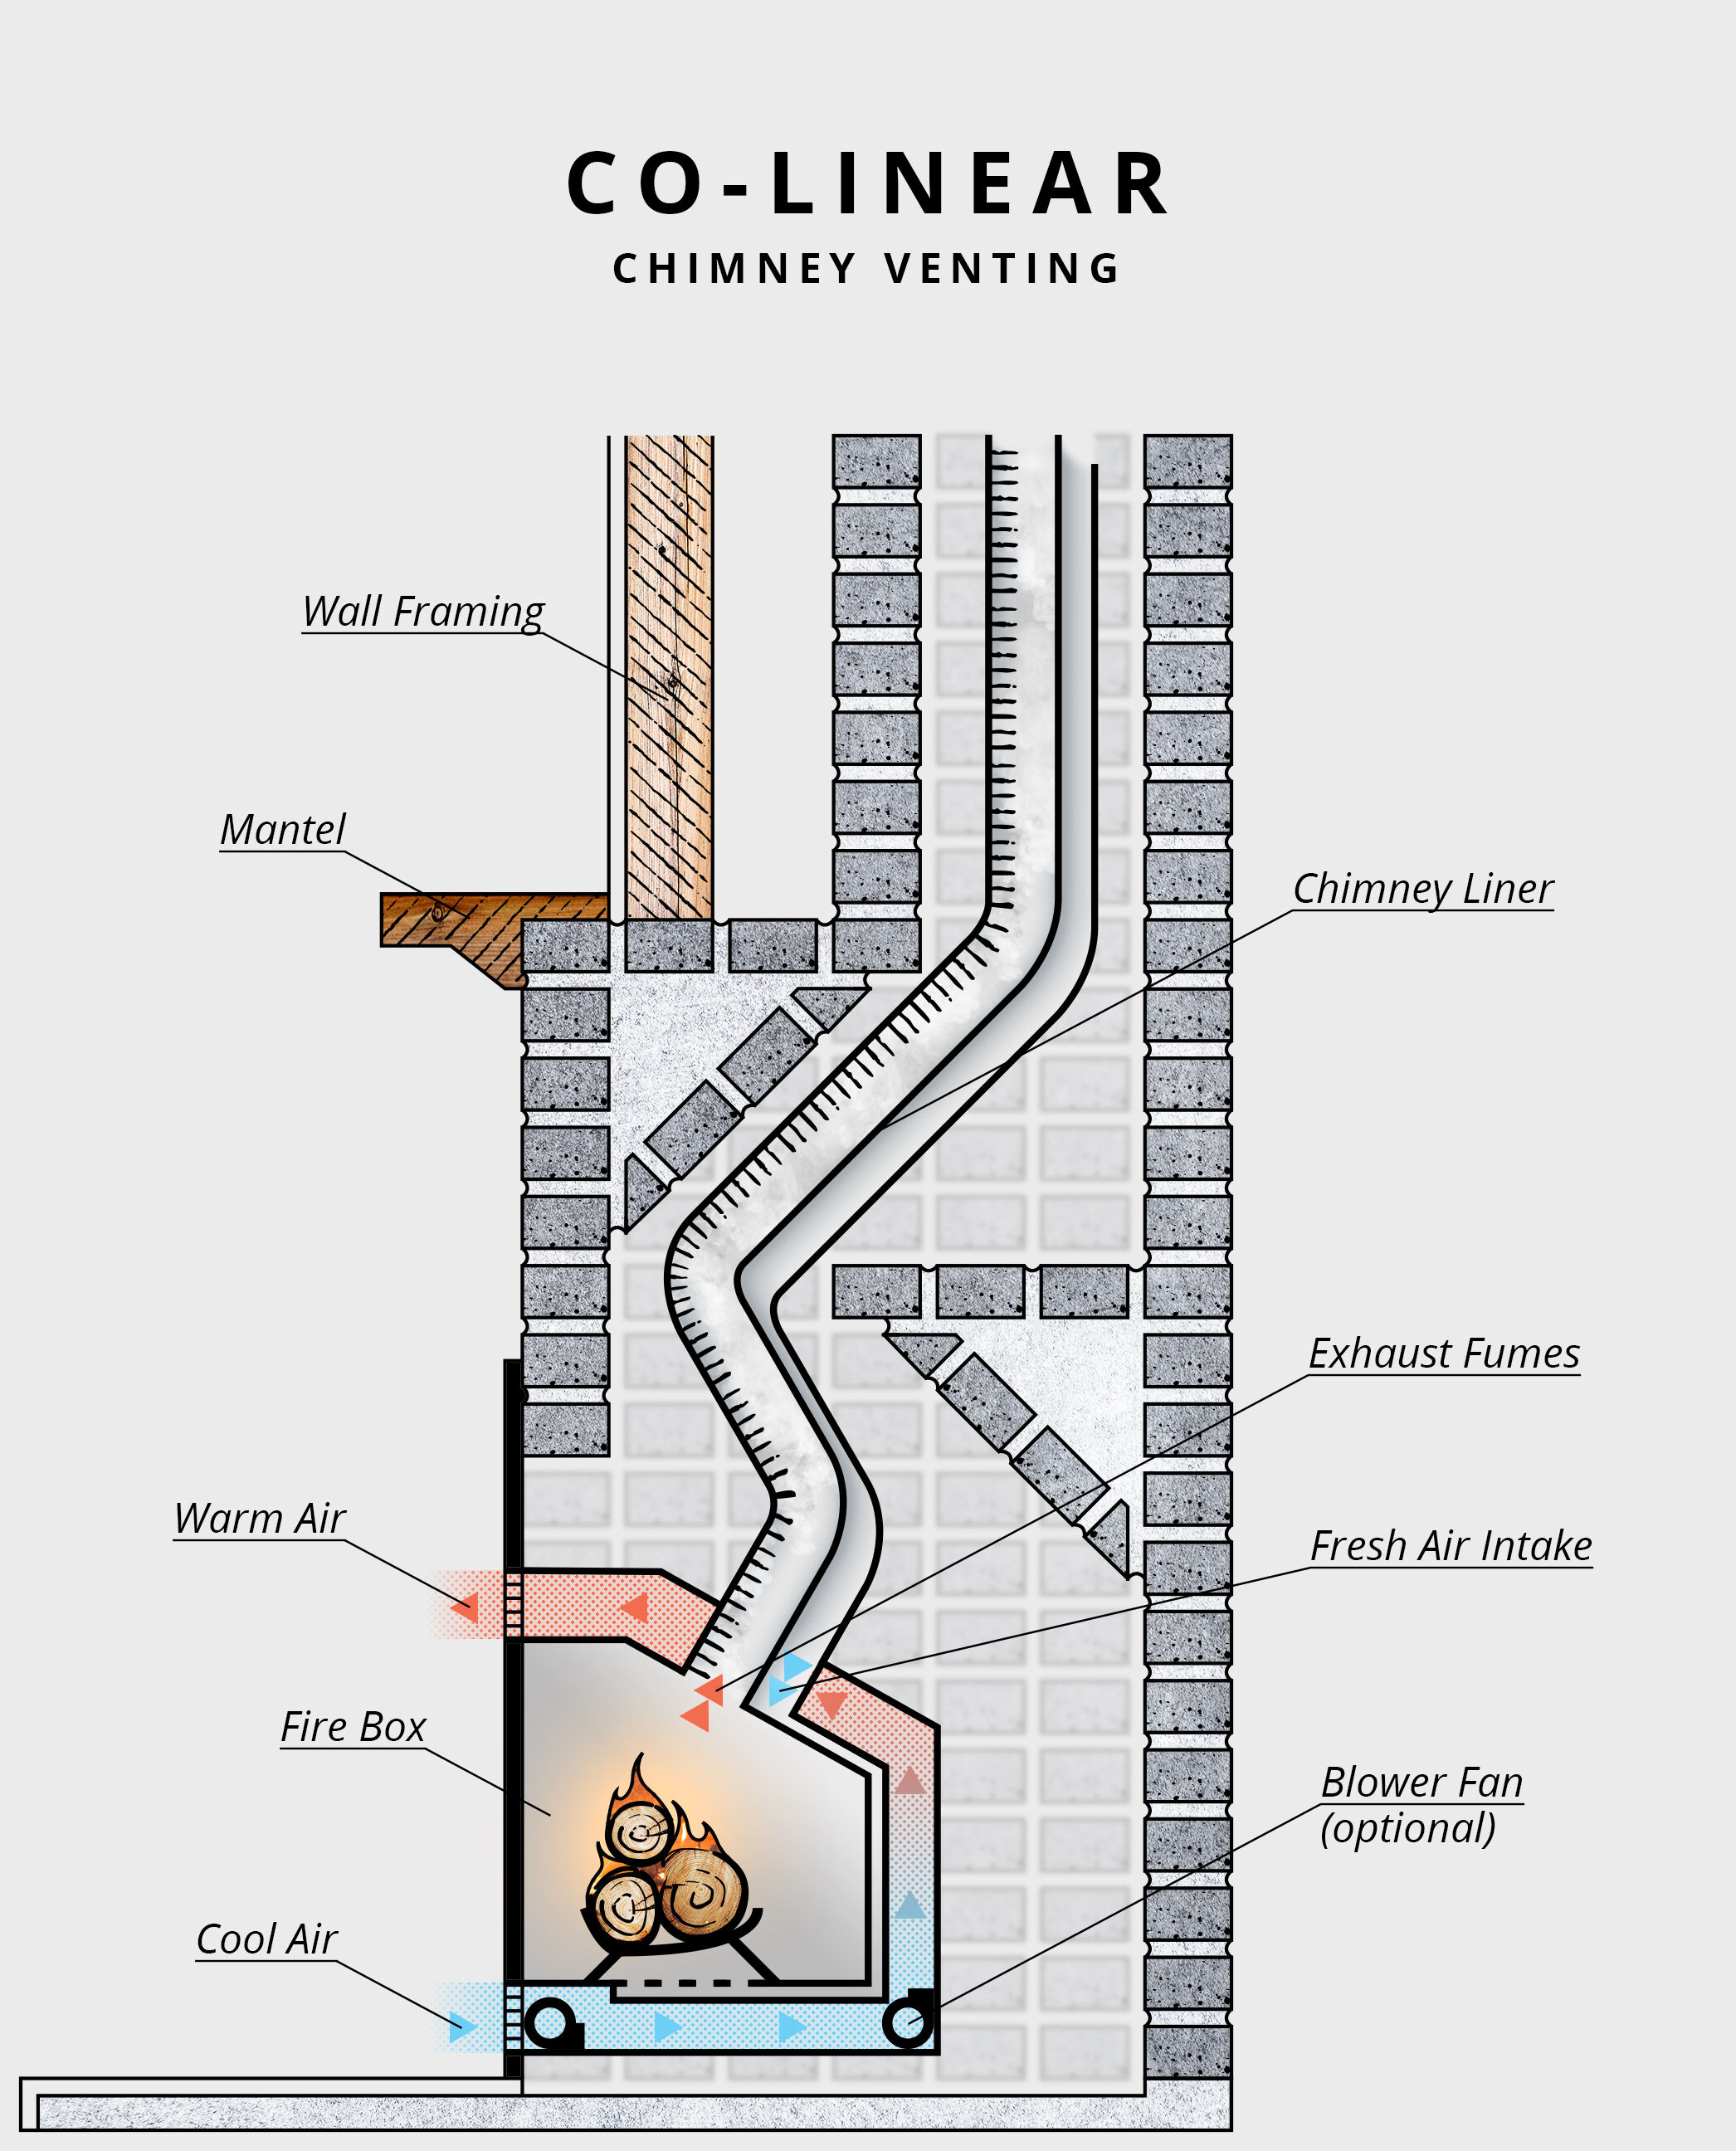 Gas Fireplace Ing Guide, Venting Gas Fireplace Through Chimney